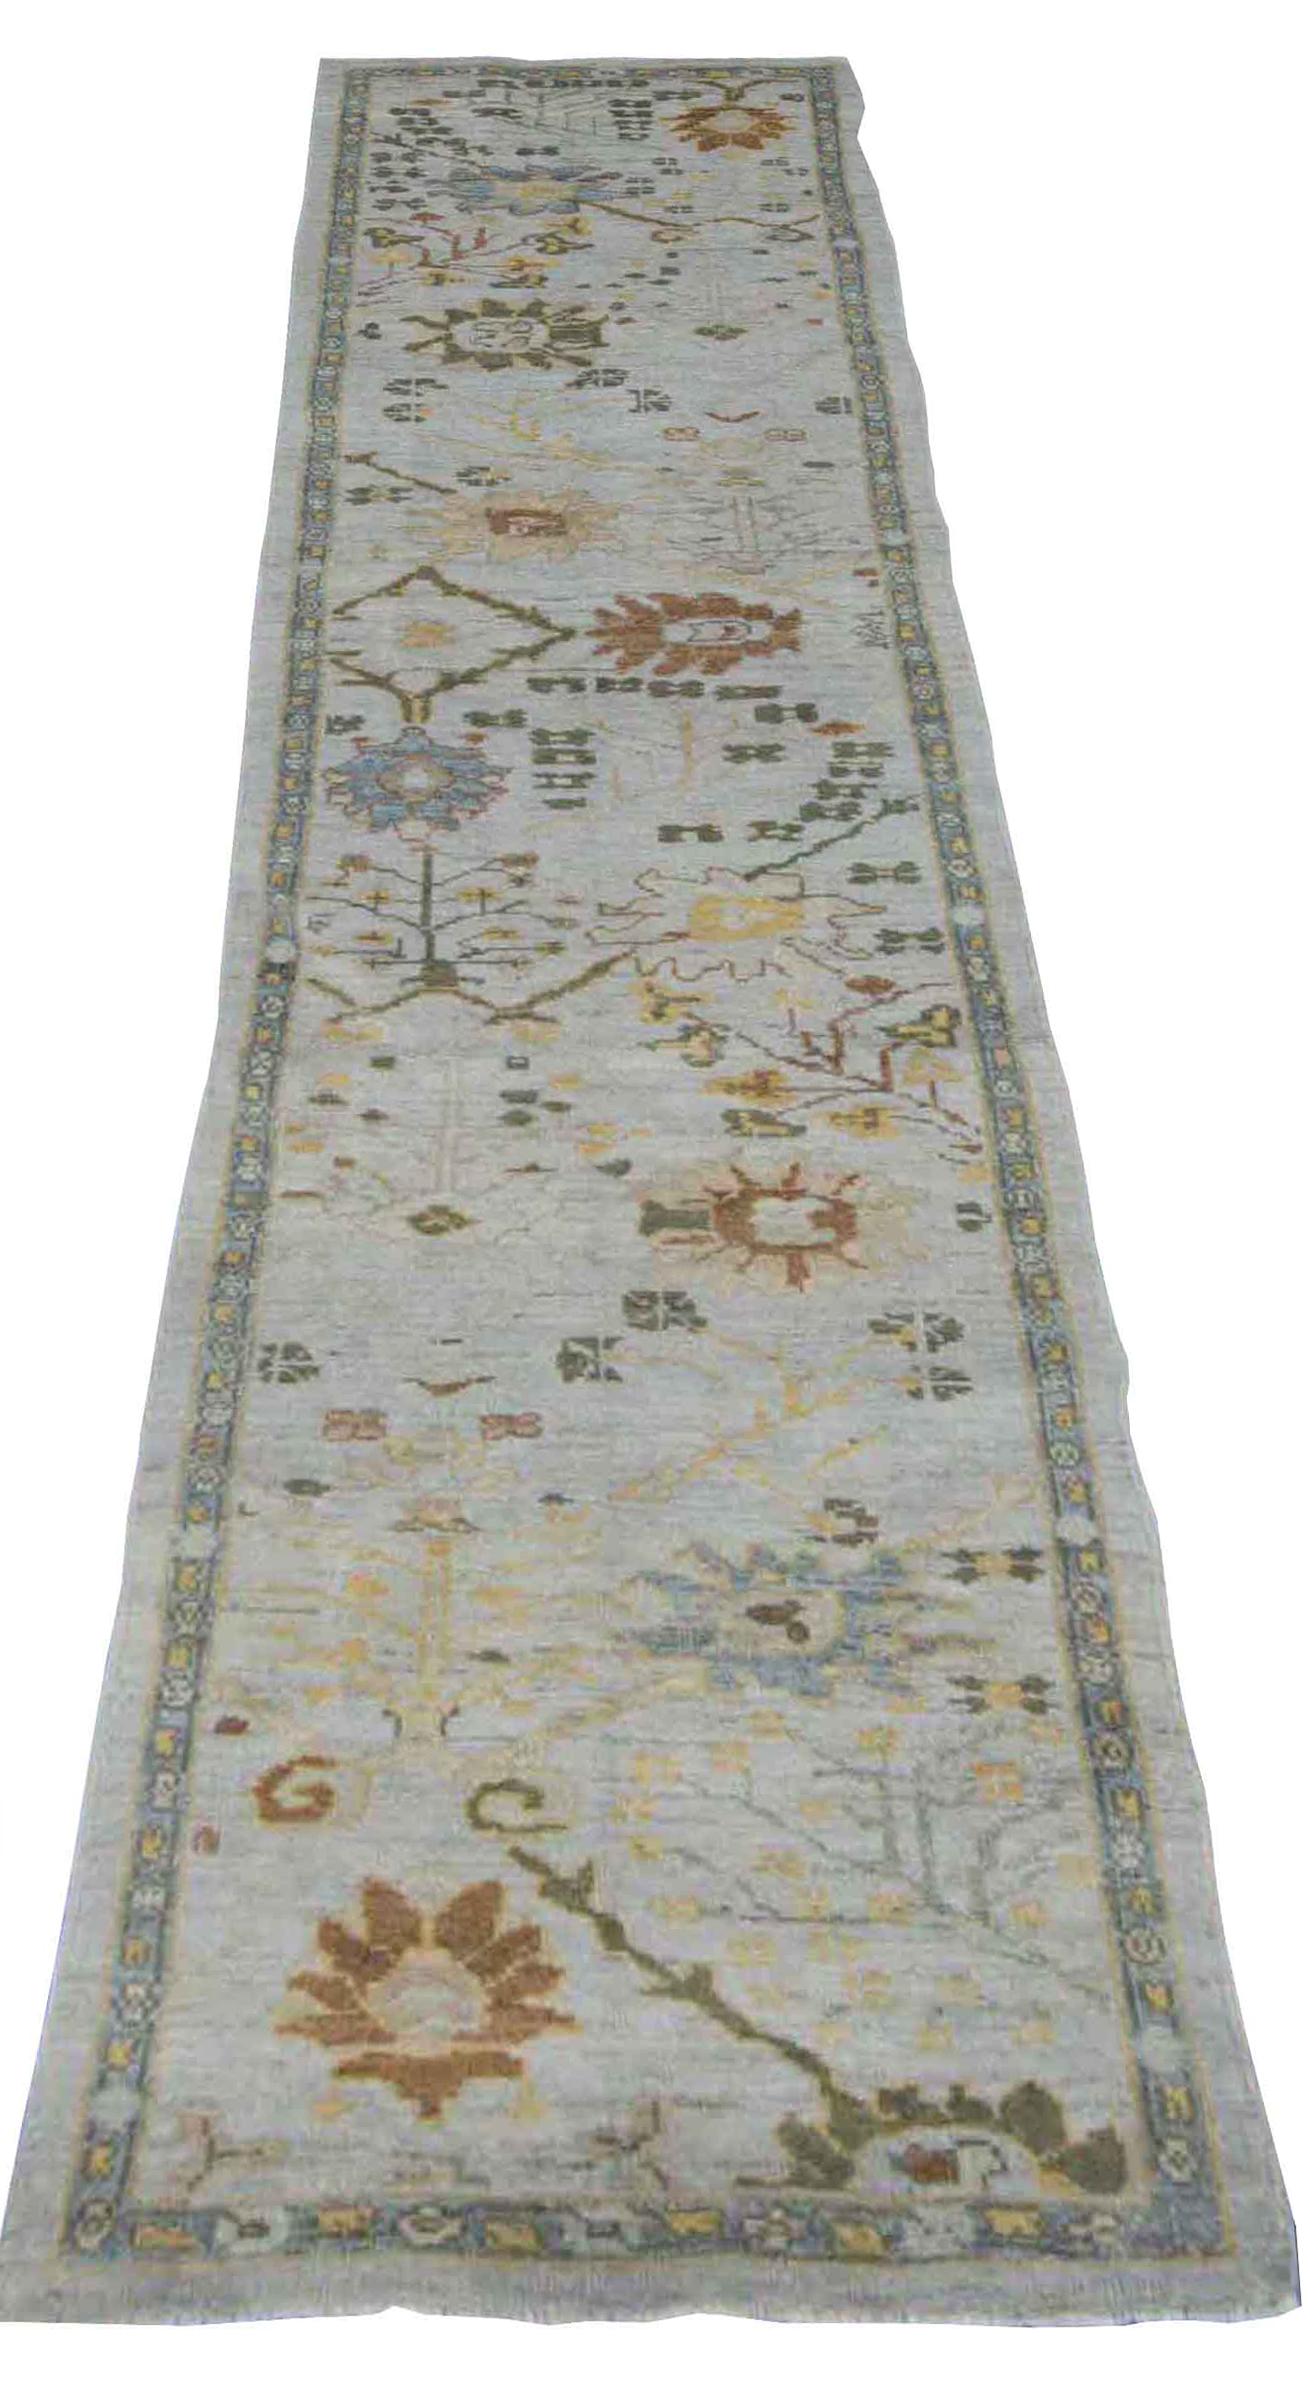 Modern Turkish rug made of handwoven sheep’s wool of the finest quality. It’s colored with organic vegetable dyes that are certified safe for humans and pets alike. It features an ivory field with brown floral patterns identified with Oushak weaving